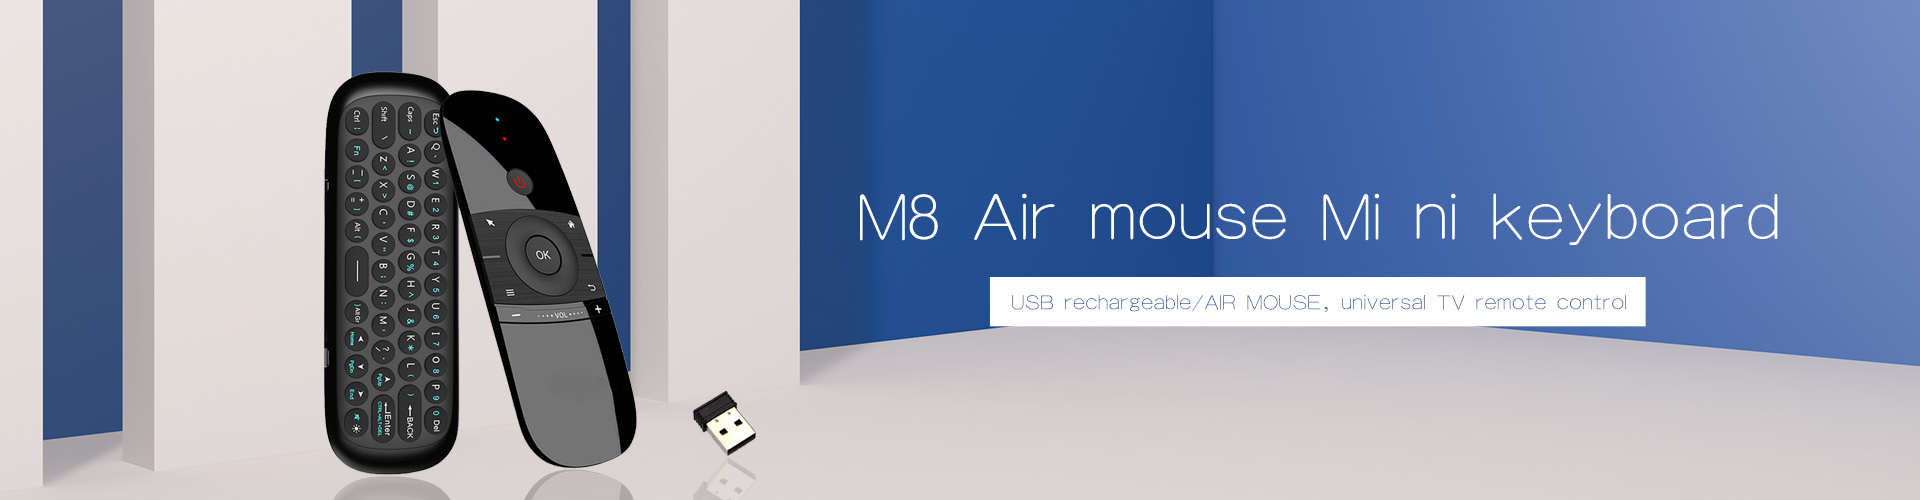 M8 Flying Mouse keyboard